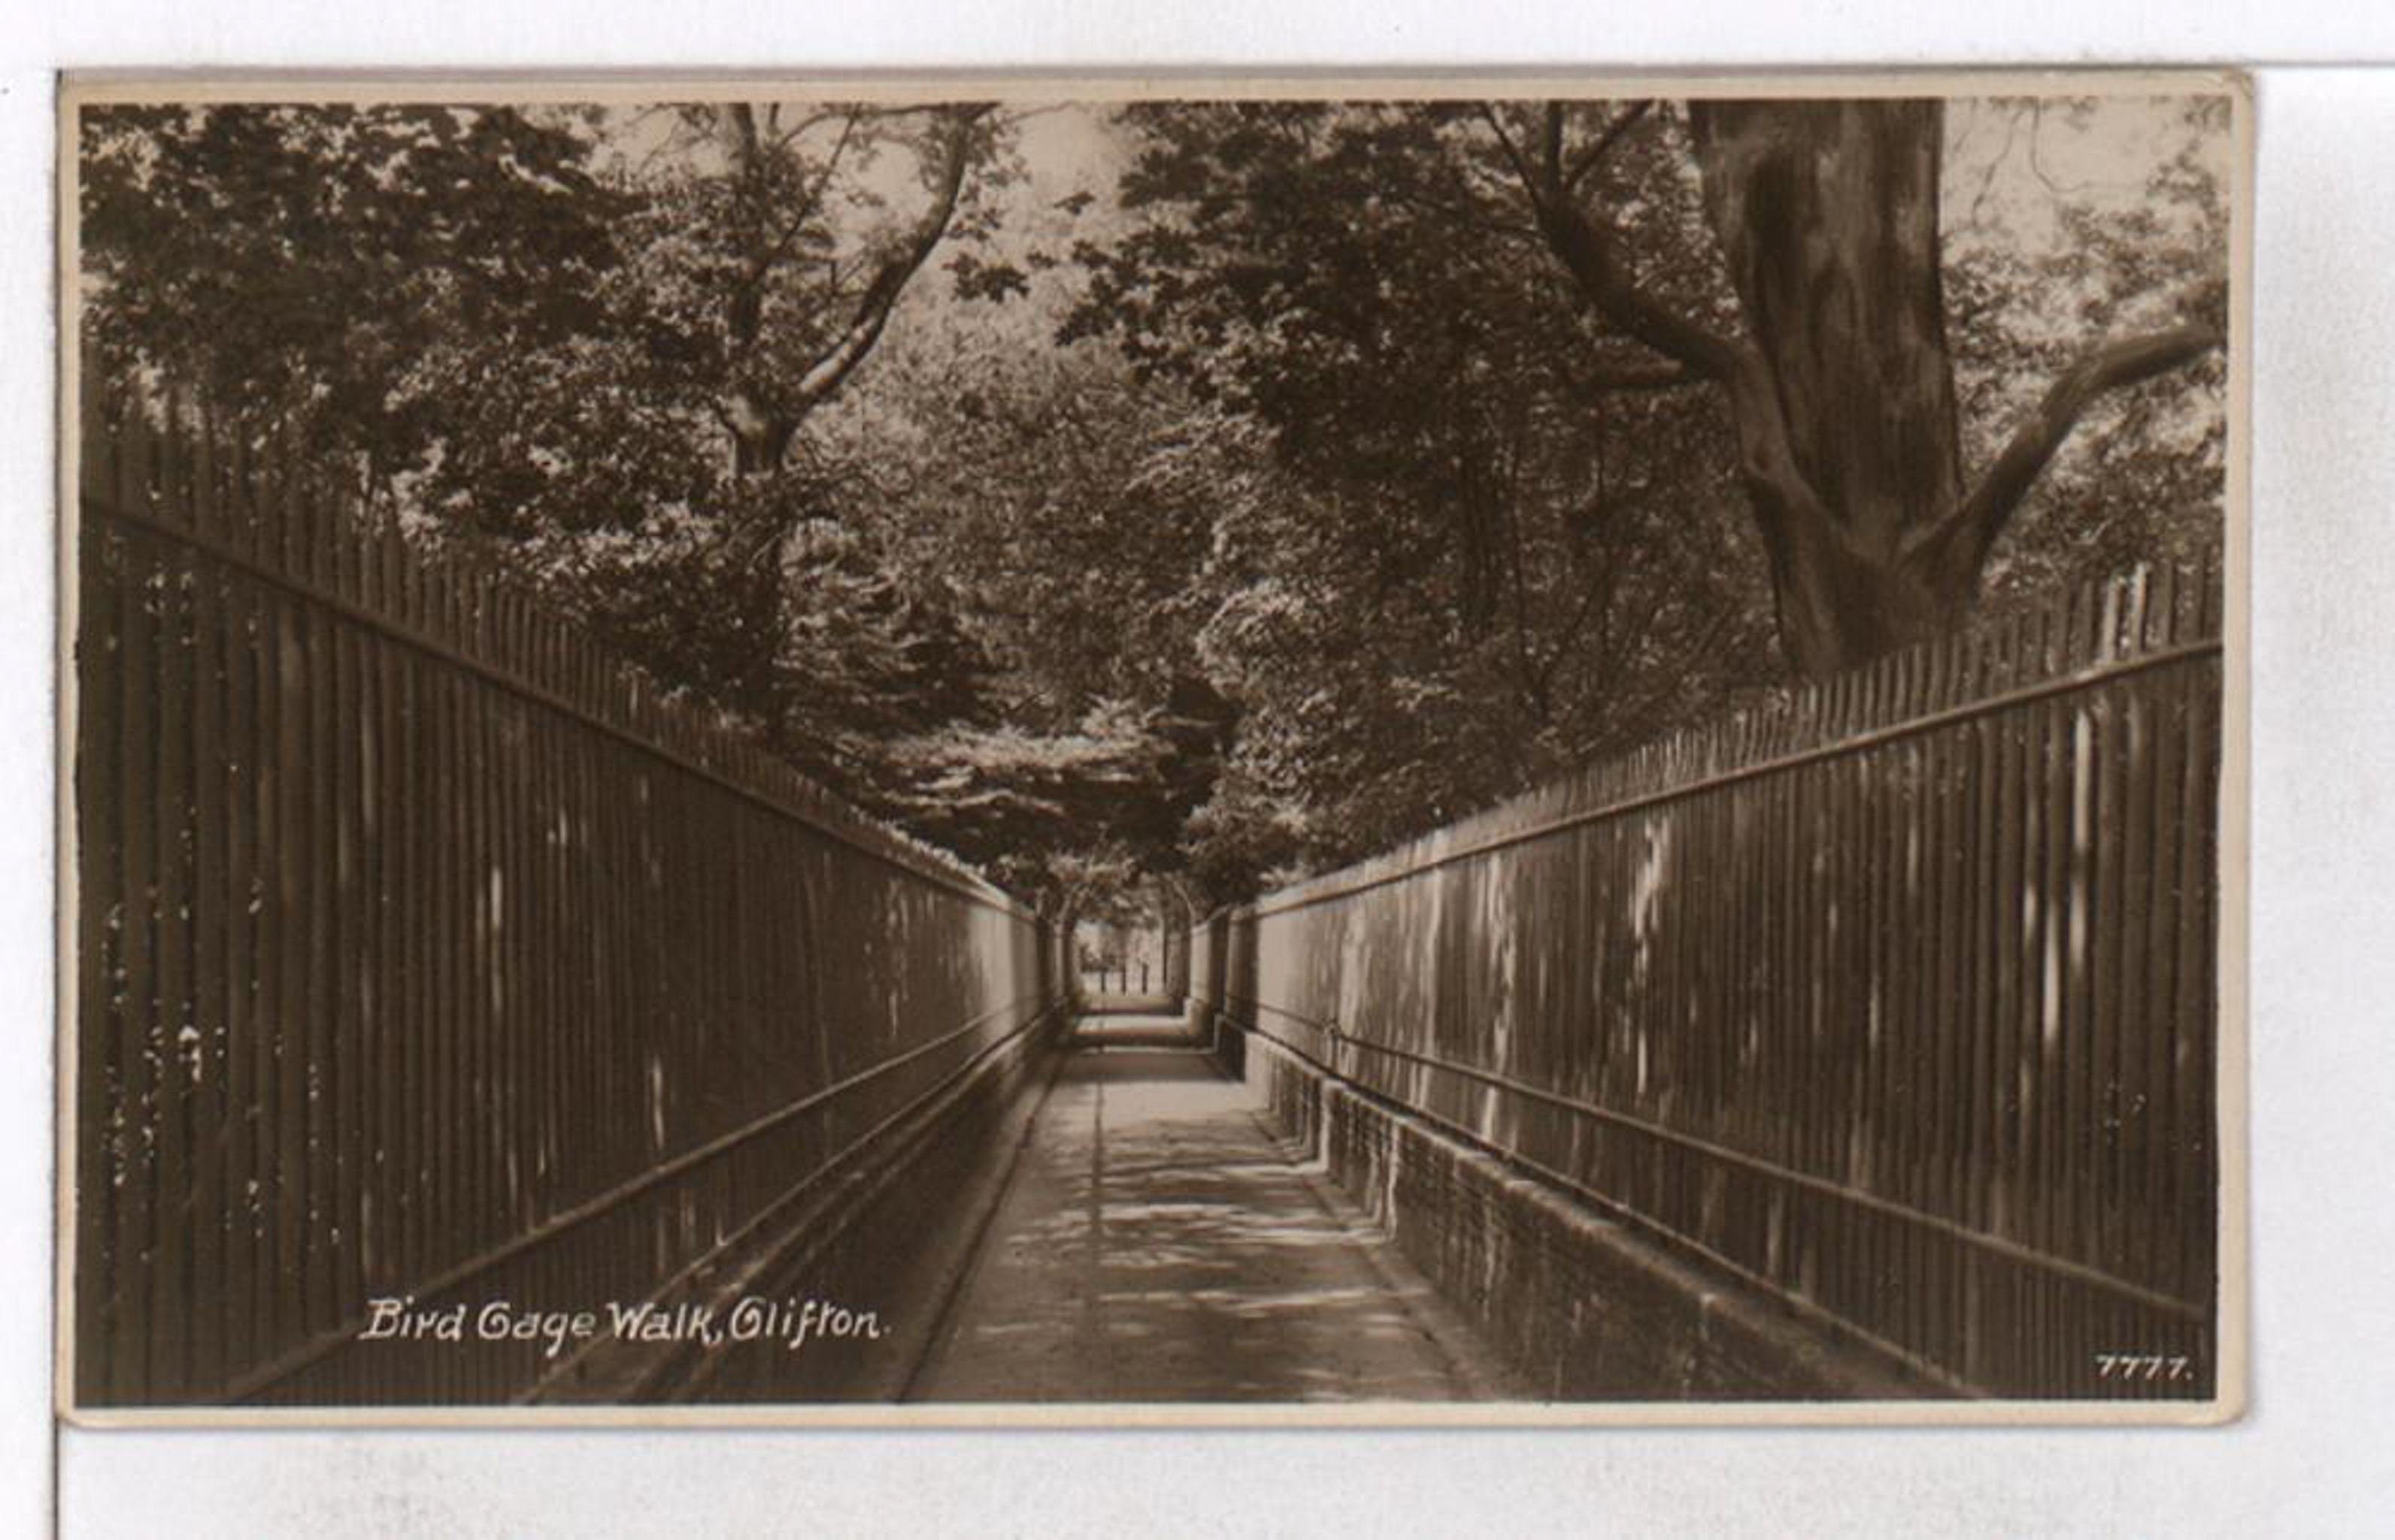 Bird Cage Walk
Before WWII, you can see why one might have wanted an underpass to cross between the two halves of the private garden on either side of Birdcage Wa...